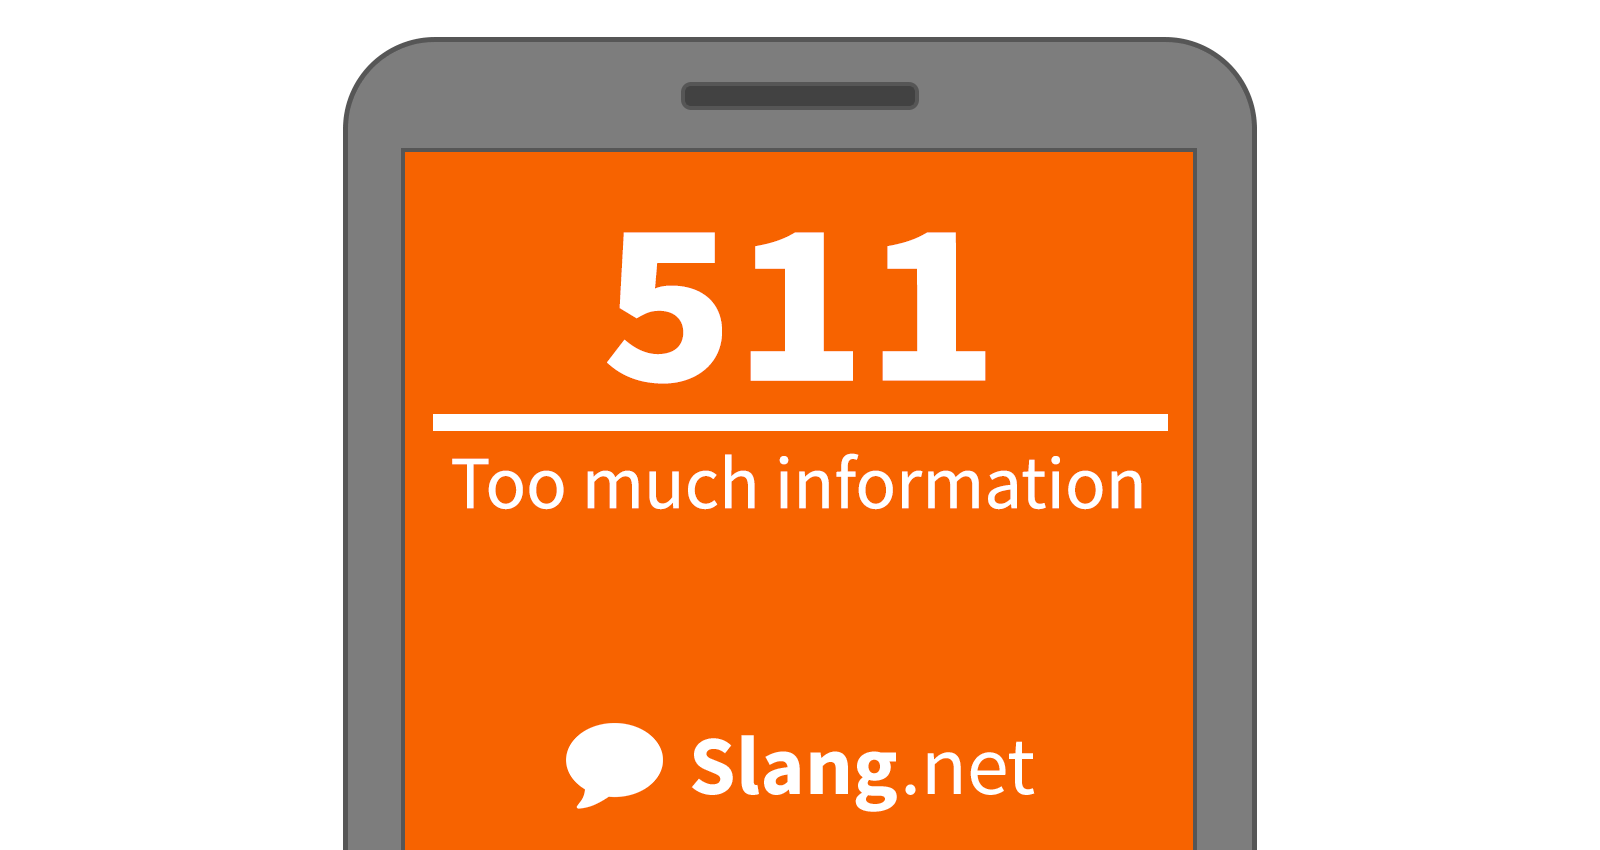 511 means &quot;too much information&quot;